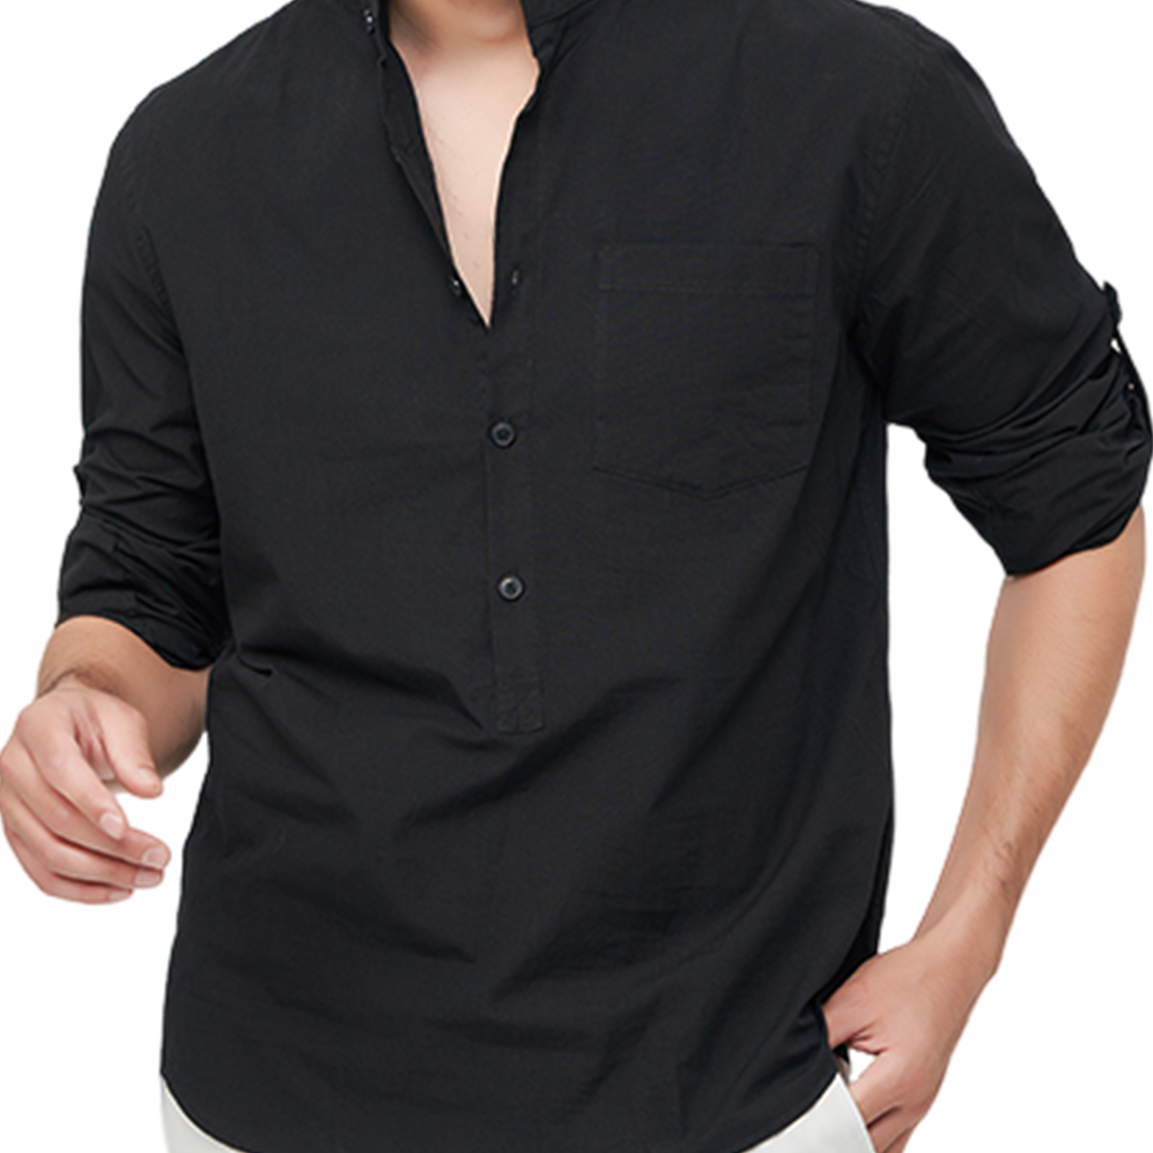 Men's Solid Color Henley Collar Cotton Pocket Button Up Casual Long Sleeve Shirt